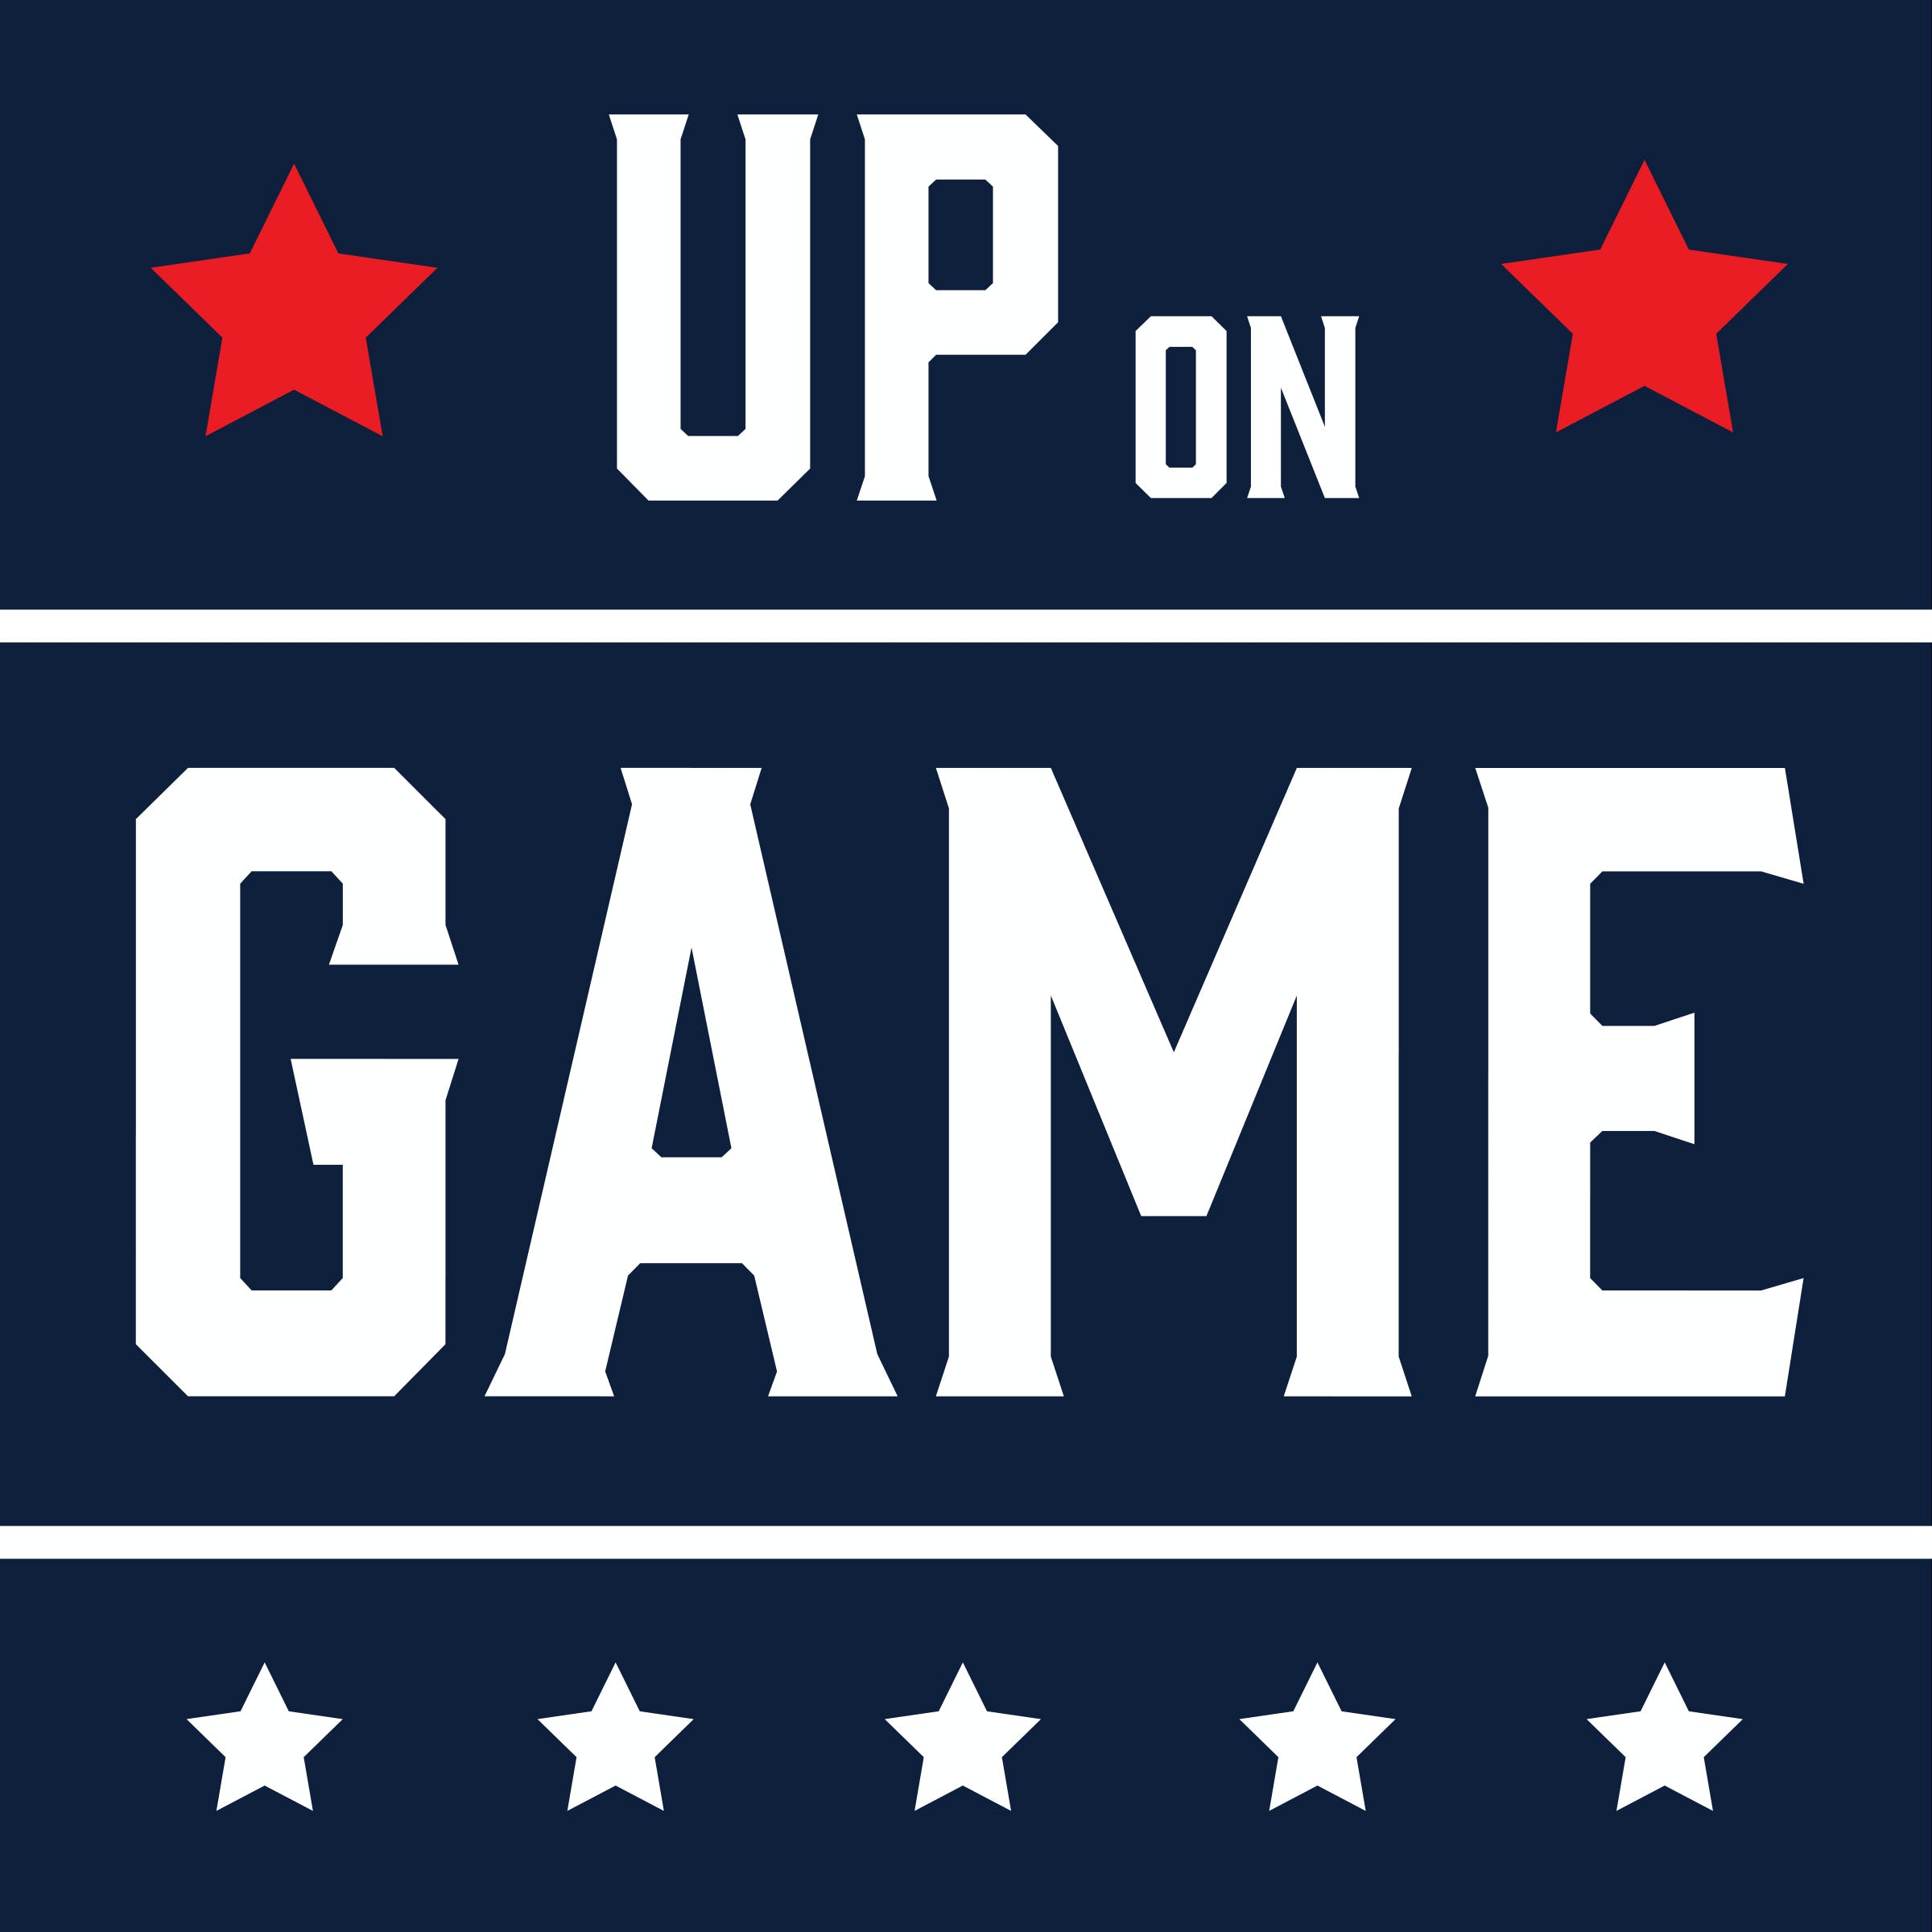 Up on Game: Hour 2 – Aaron Rodgers, Lane Kiffin, and Caleb Williams!